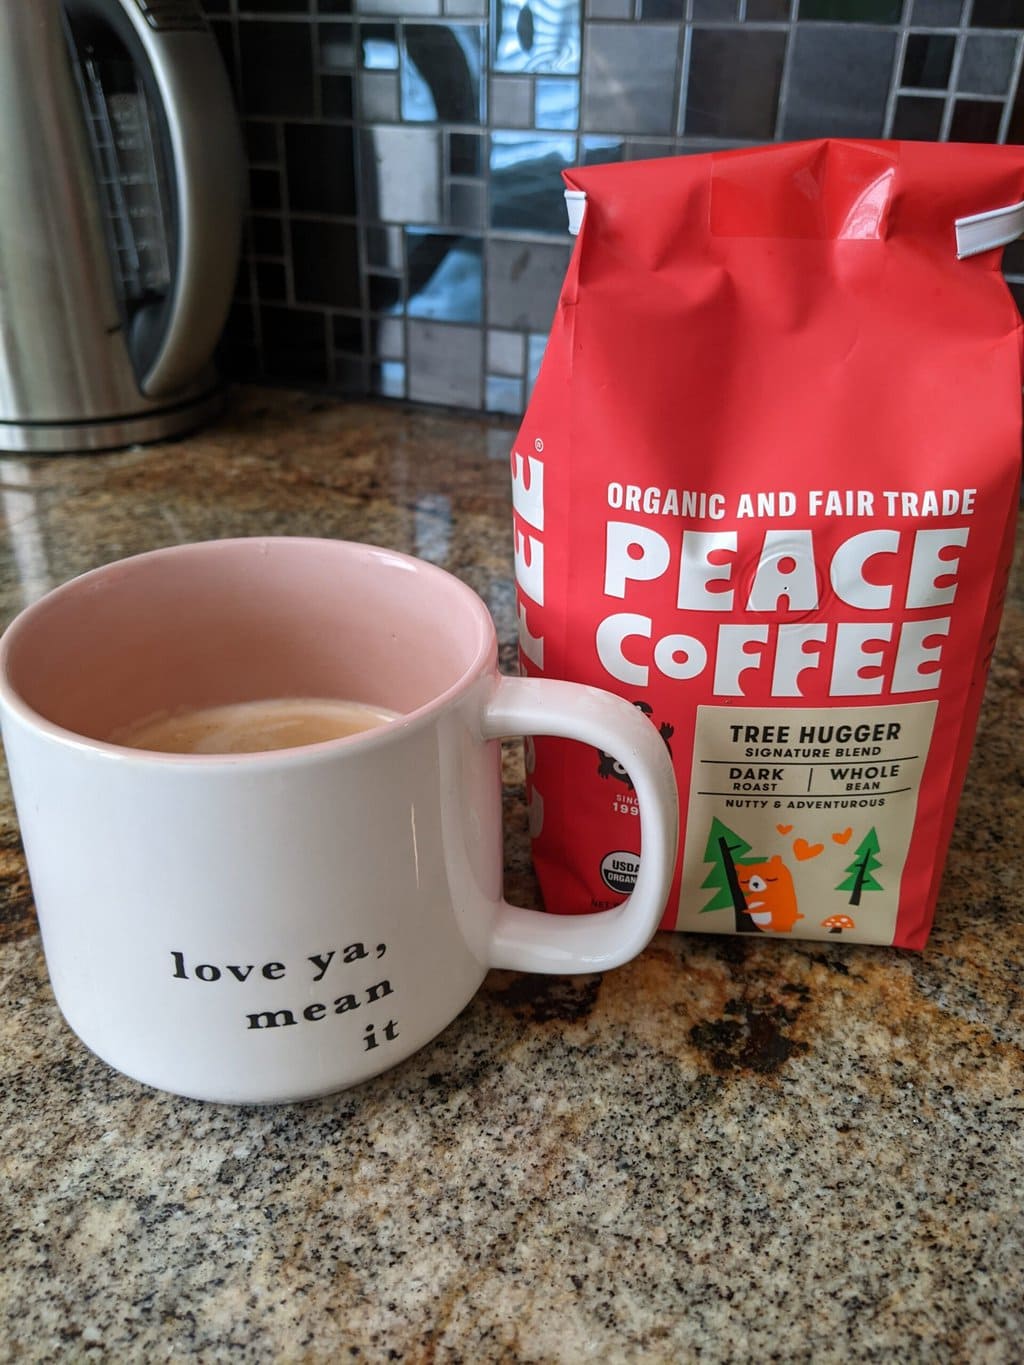 Peace Coffee Tree Hugger Signature Blend Dark Roast stands on the kitchen table next to a brewed cup of coffee